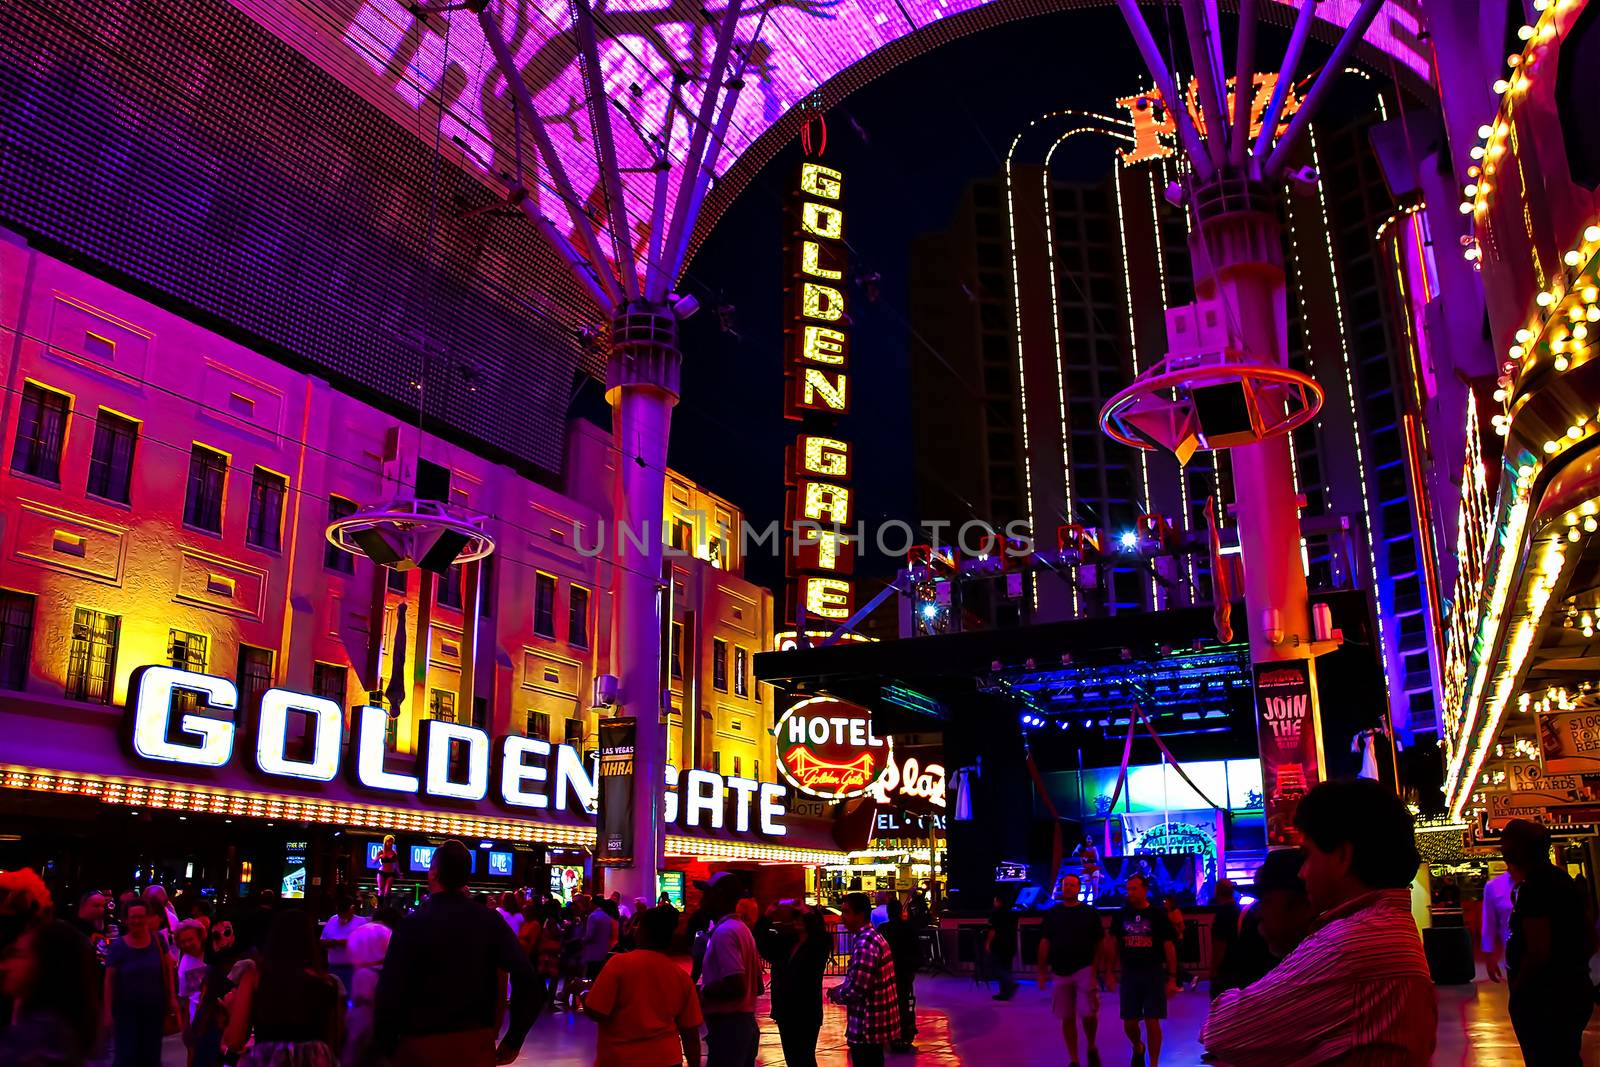 LAS VEGAS,NV - Sep 16, 2018: Golden Gate Hotel & Casino sign illuminated by night in Las Vegas. It is the oldest and smallest hotel located on the Fremont Street Experience.